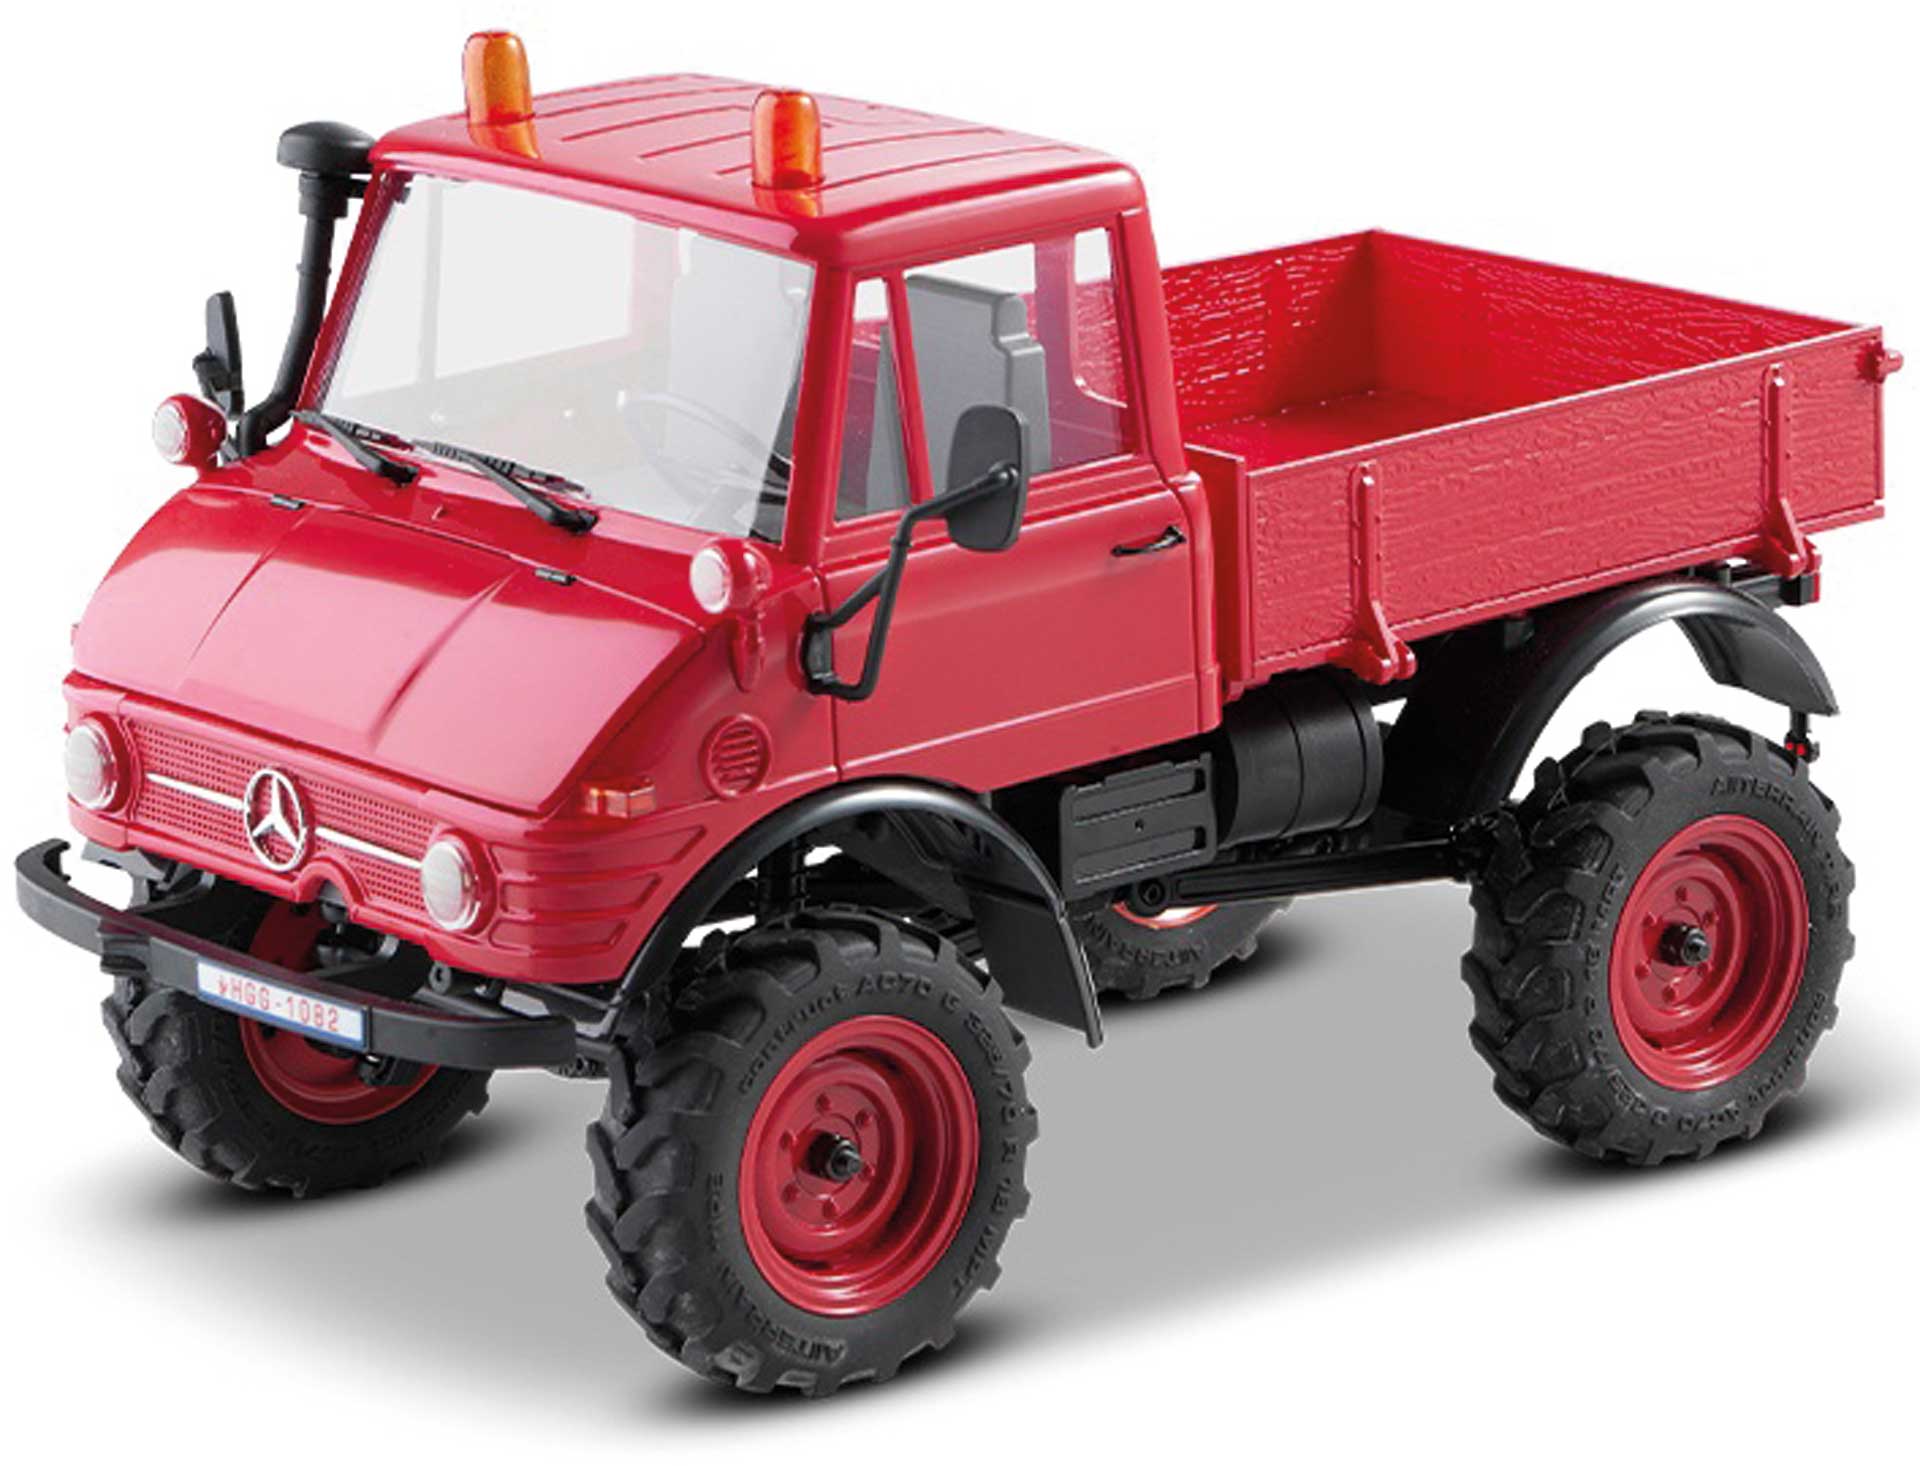 FMS FXC24 Unimog 421 1:24 rouge - RTR 2.4GHz